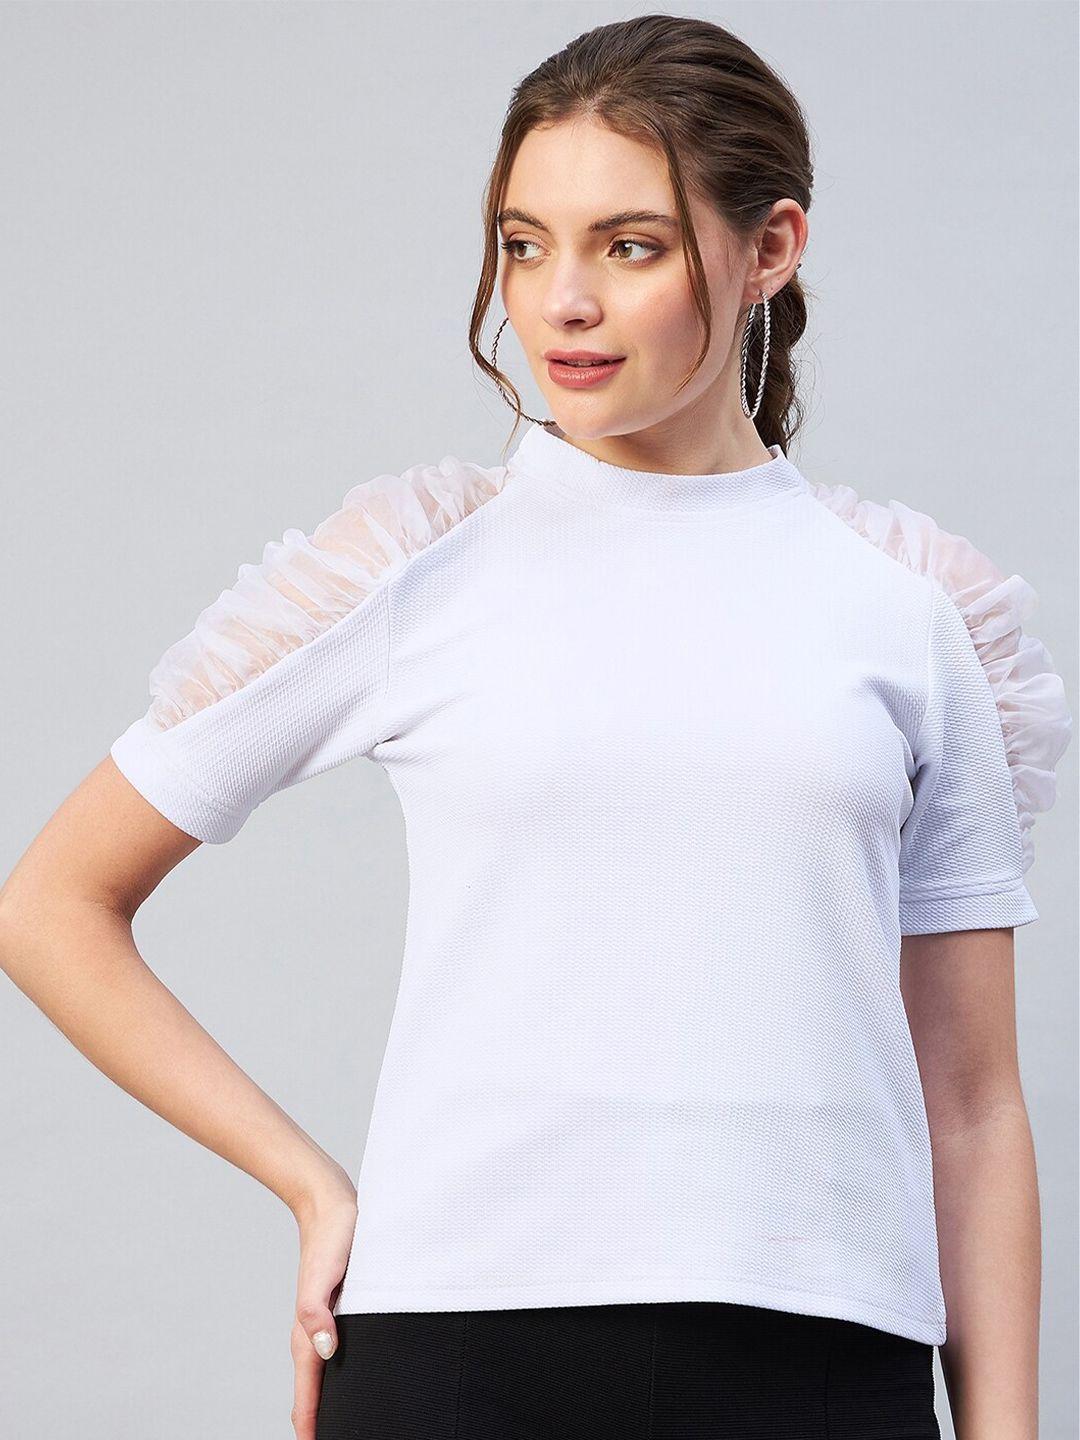 marie-claire-white-puff-sleeves-top